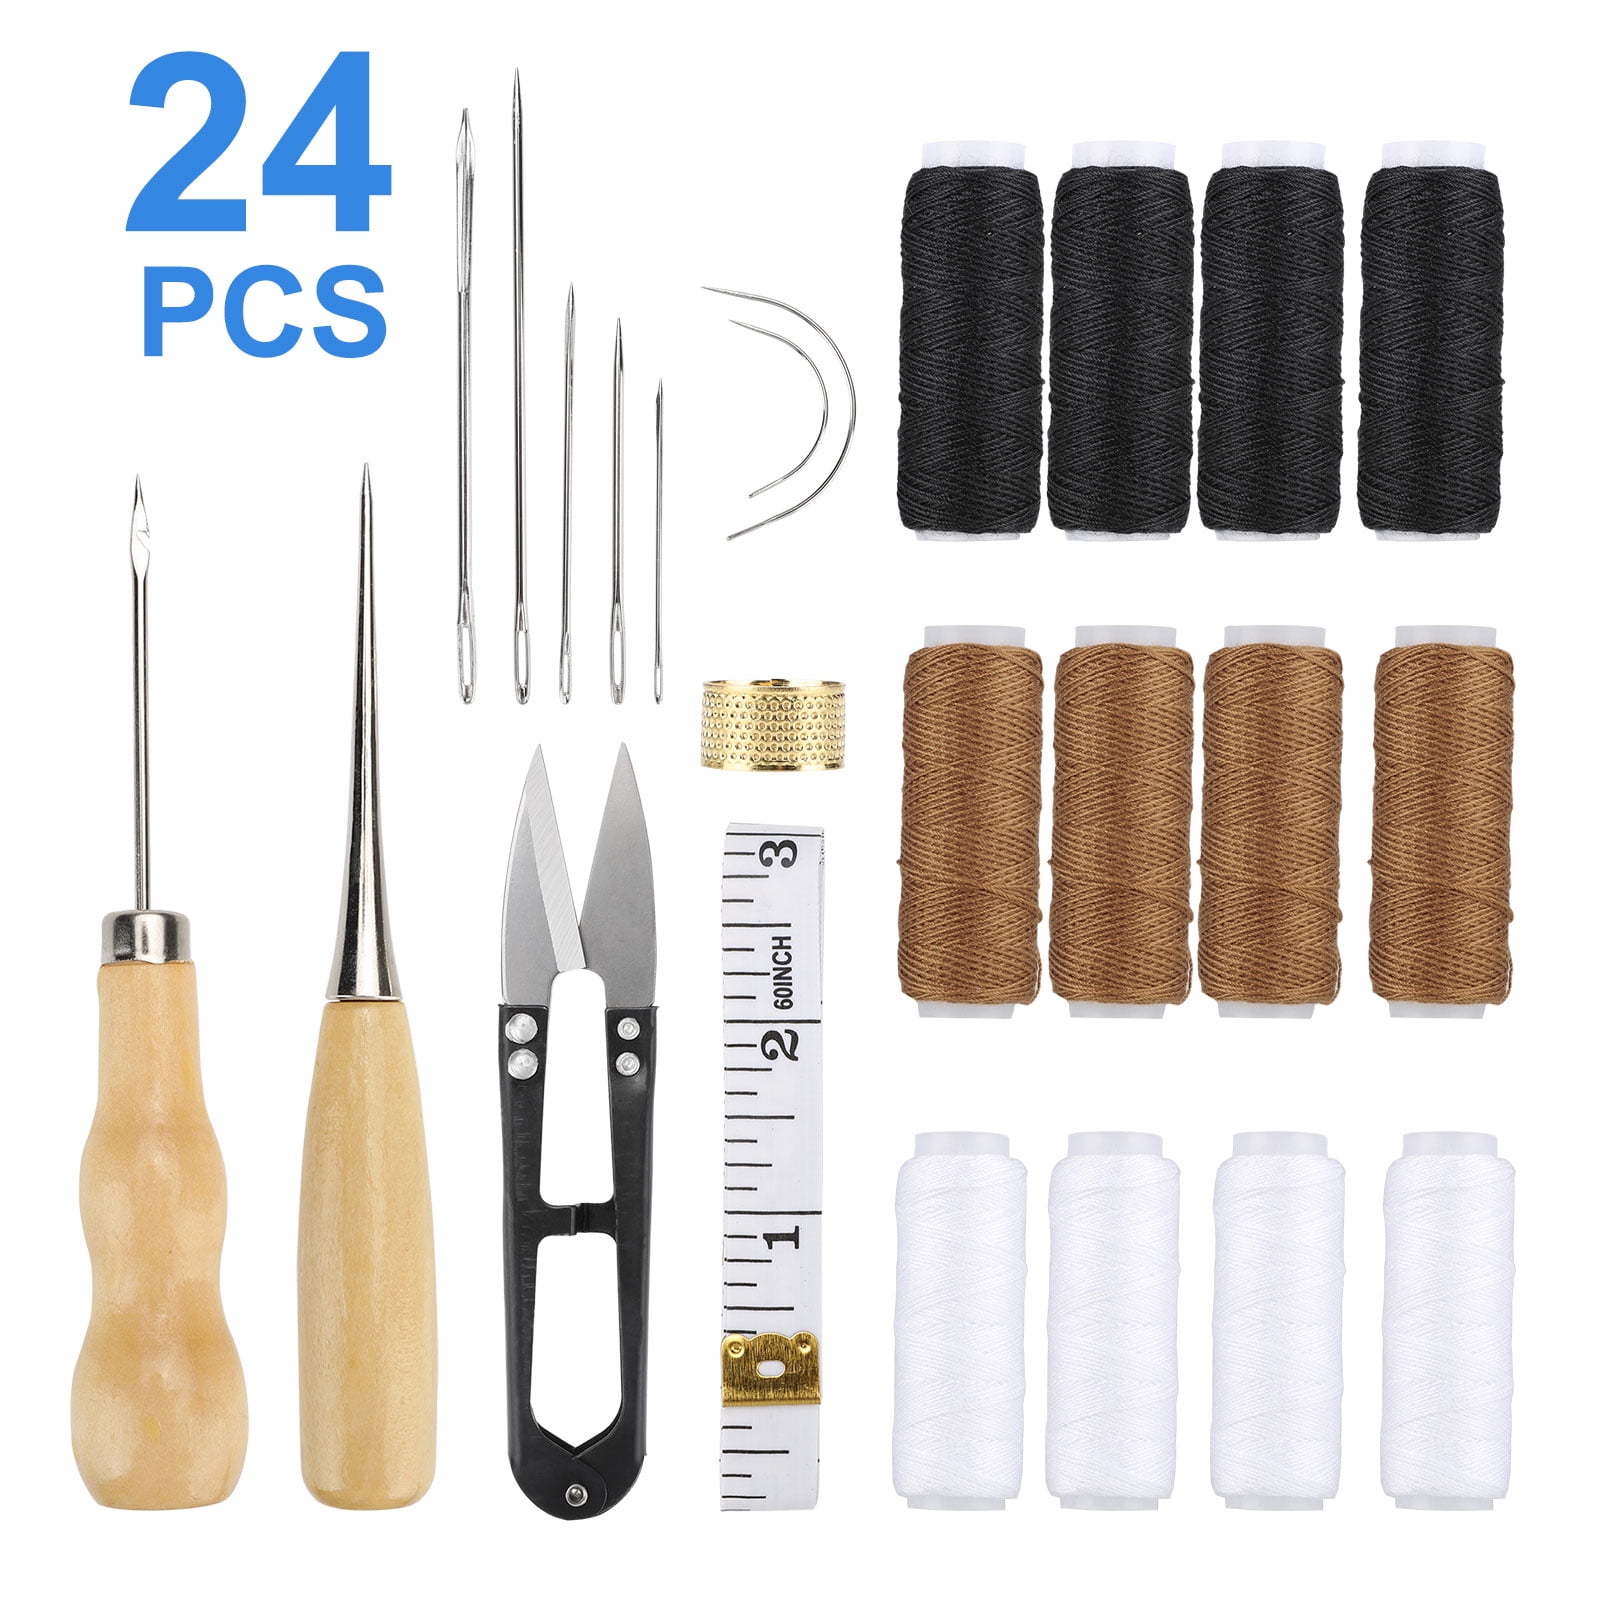 7xStitching Needles Canvas Sewing Leather Patching Craft Handmade Repair Tool TC 